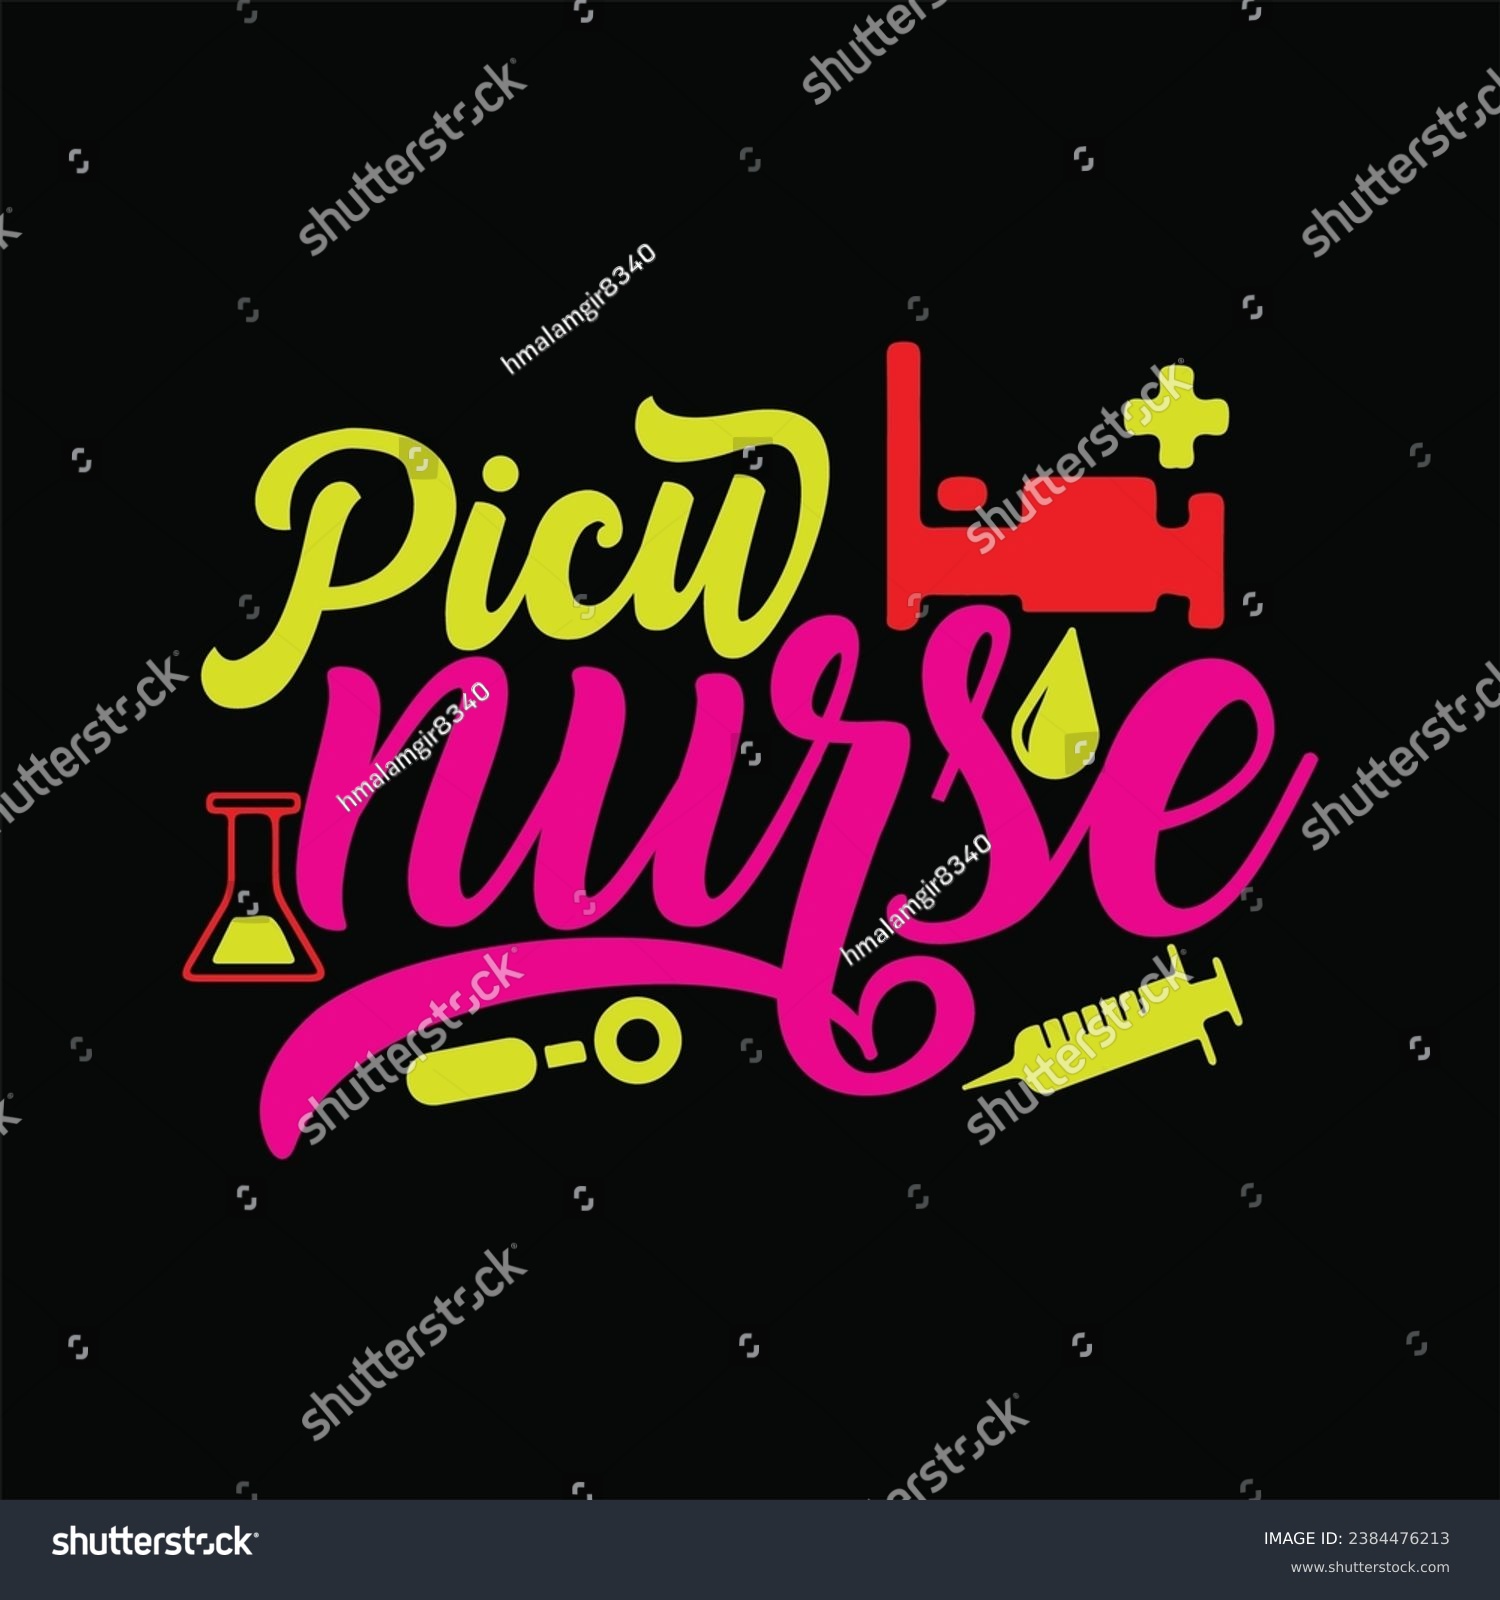 SVG of Picu nurse 1 t-shirt design. Here You Can find and Buy t-Shirt Design. Digital Files for yourself, friends and family, or anyone who supports your Special Day and Occasions. svg